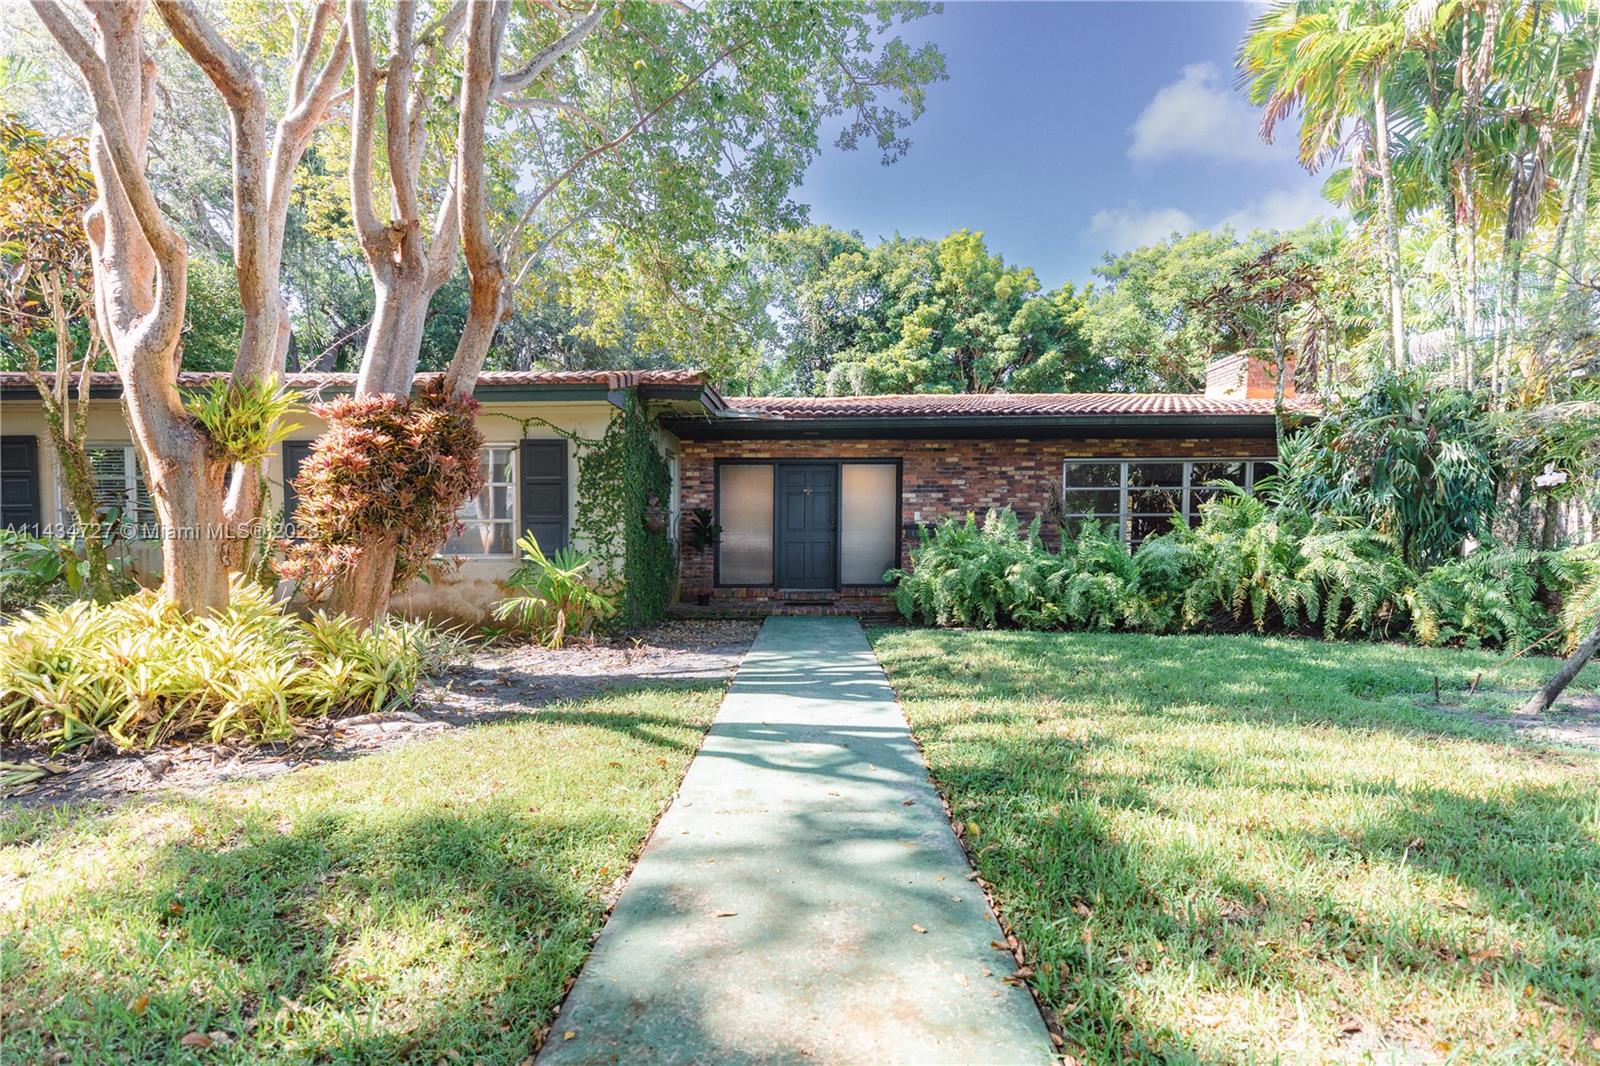 A unique opportunity to create your dream home in the desirable Coral Gables neighborhood. This spacious 2,605 sq ft, 3 bedrooms, 2 bathrooms home, sits on a sizable 10,500 sq ft lot. The house is bright, with spacious living areas and Caico tile floors. The ample size kitchen includes wood cabinets and a breakfast area with backyard views. Bring your designer and settle in this lush community, located near top-rated schools, excellent restaurants, upscale shopping destinations and an array of recreational activities.